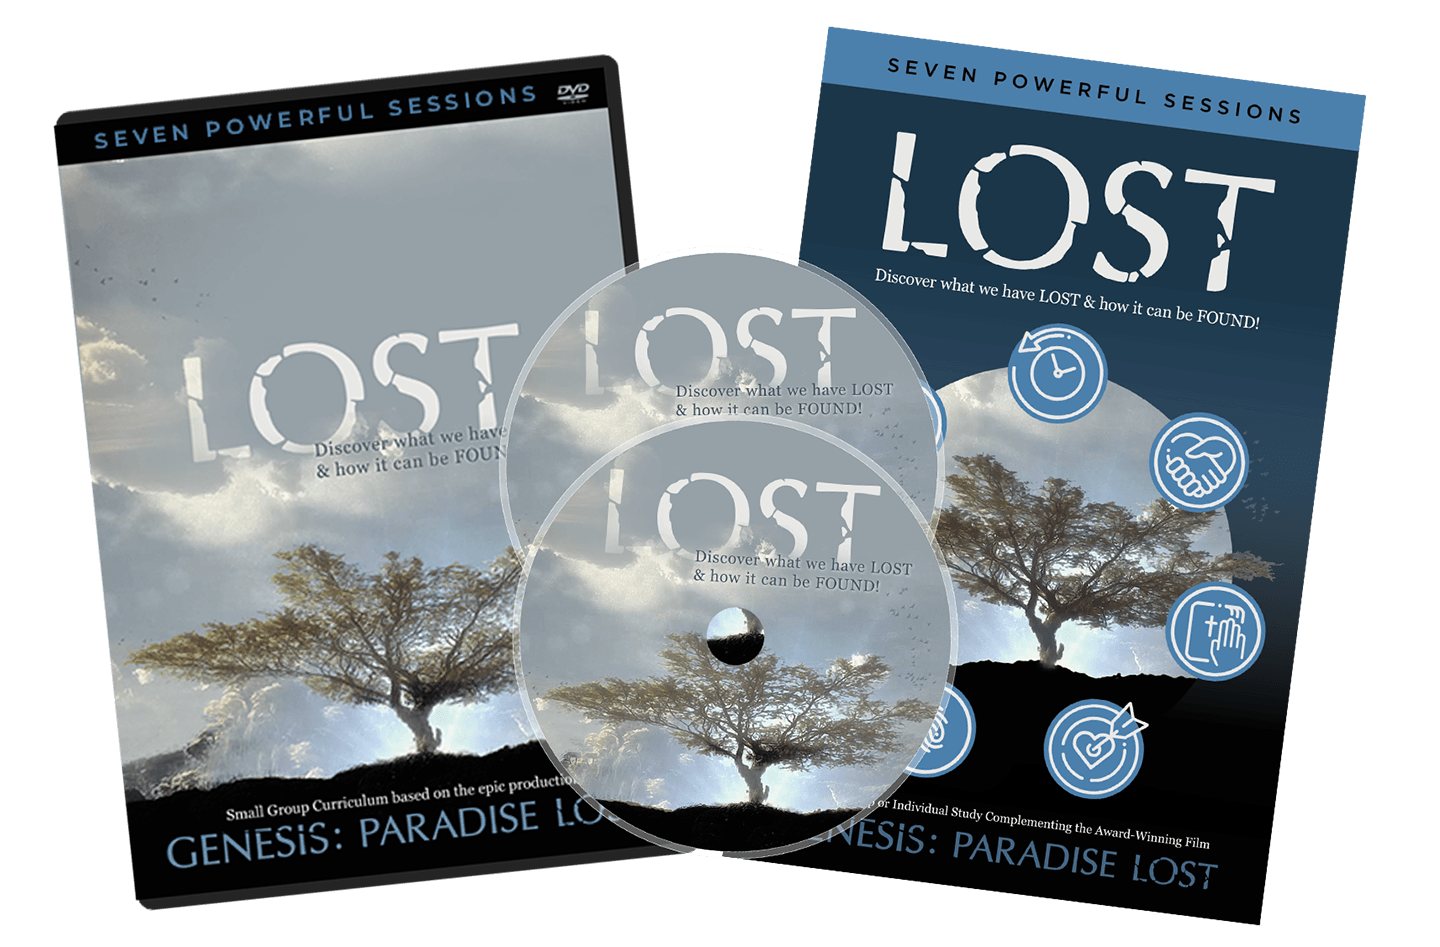 LOST - Study Guide and DVD showing 2 Discs